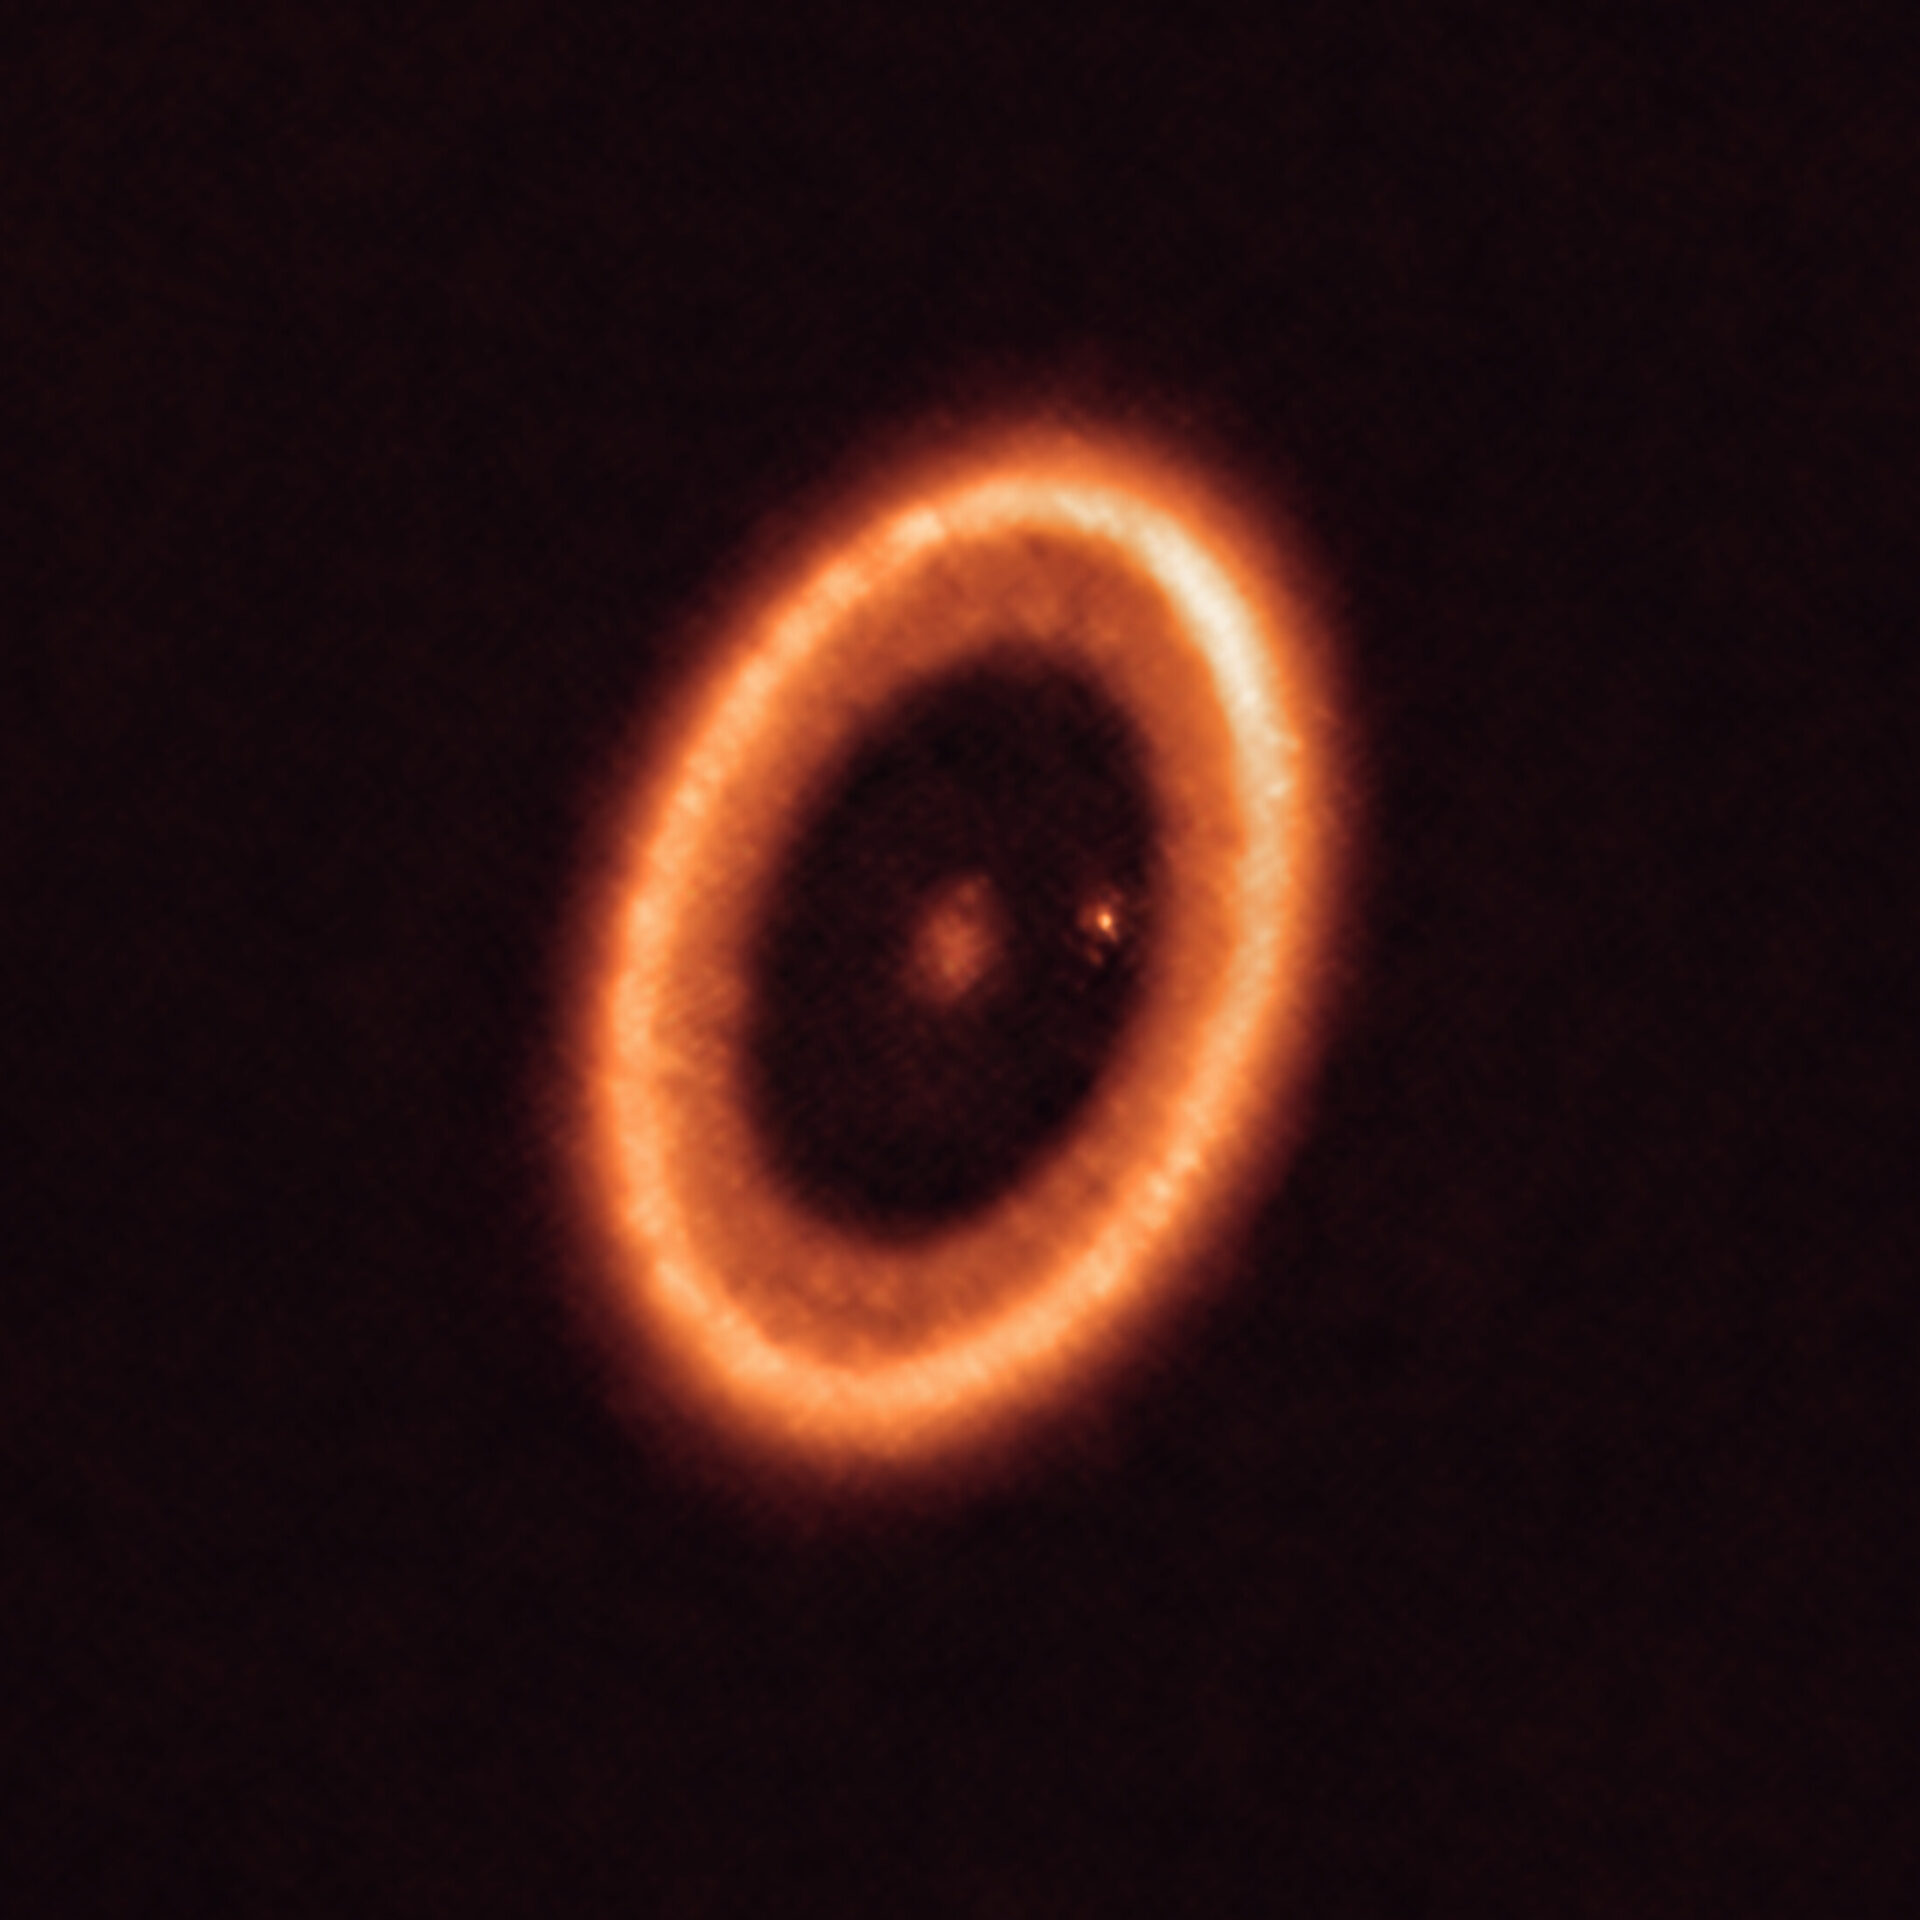 <p>This image, taken with the Atacama Large Millimeter/submillimeter Array (ALMA), in which ESO is a partner, shows the PDS 70 system, located nearly 400 light-years away and still in the process of being formed. The system features a star at its centre and at least two planets orbiting it, PDS 70b (not visible in the image) and PDS 70c, surrounded by a circumplanetary disc (the dot to the right of the star). The planets have carved a cavity in the circumstellar disc (the ring-like structure that dominates the image) as they gobbled up material from the disc itself, growing in size. It was during this process that PDS 70c acquired its own circumplanetary disc, which contributes to the growth of the planet and where moons can form.</p>
<p>Credit:<br />
ALMA (ESO/NAOJ/NRAO)/Benisty et al.</p>
